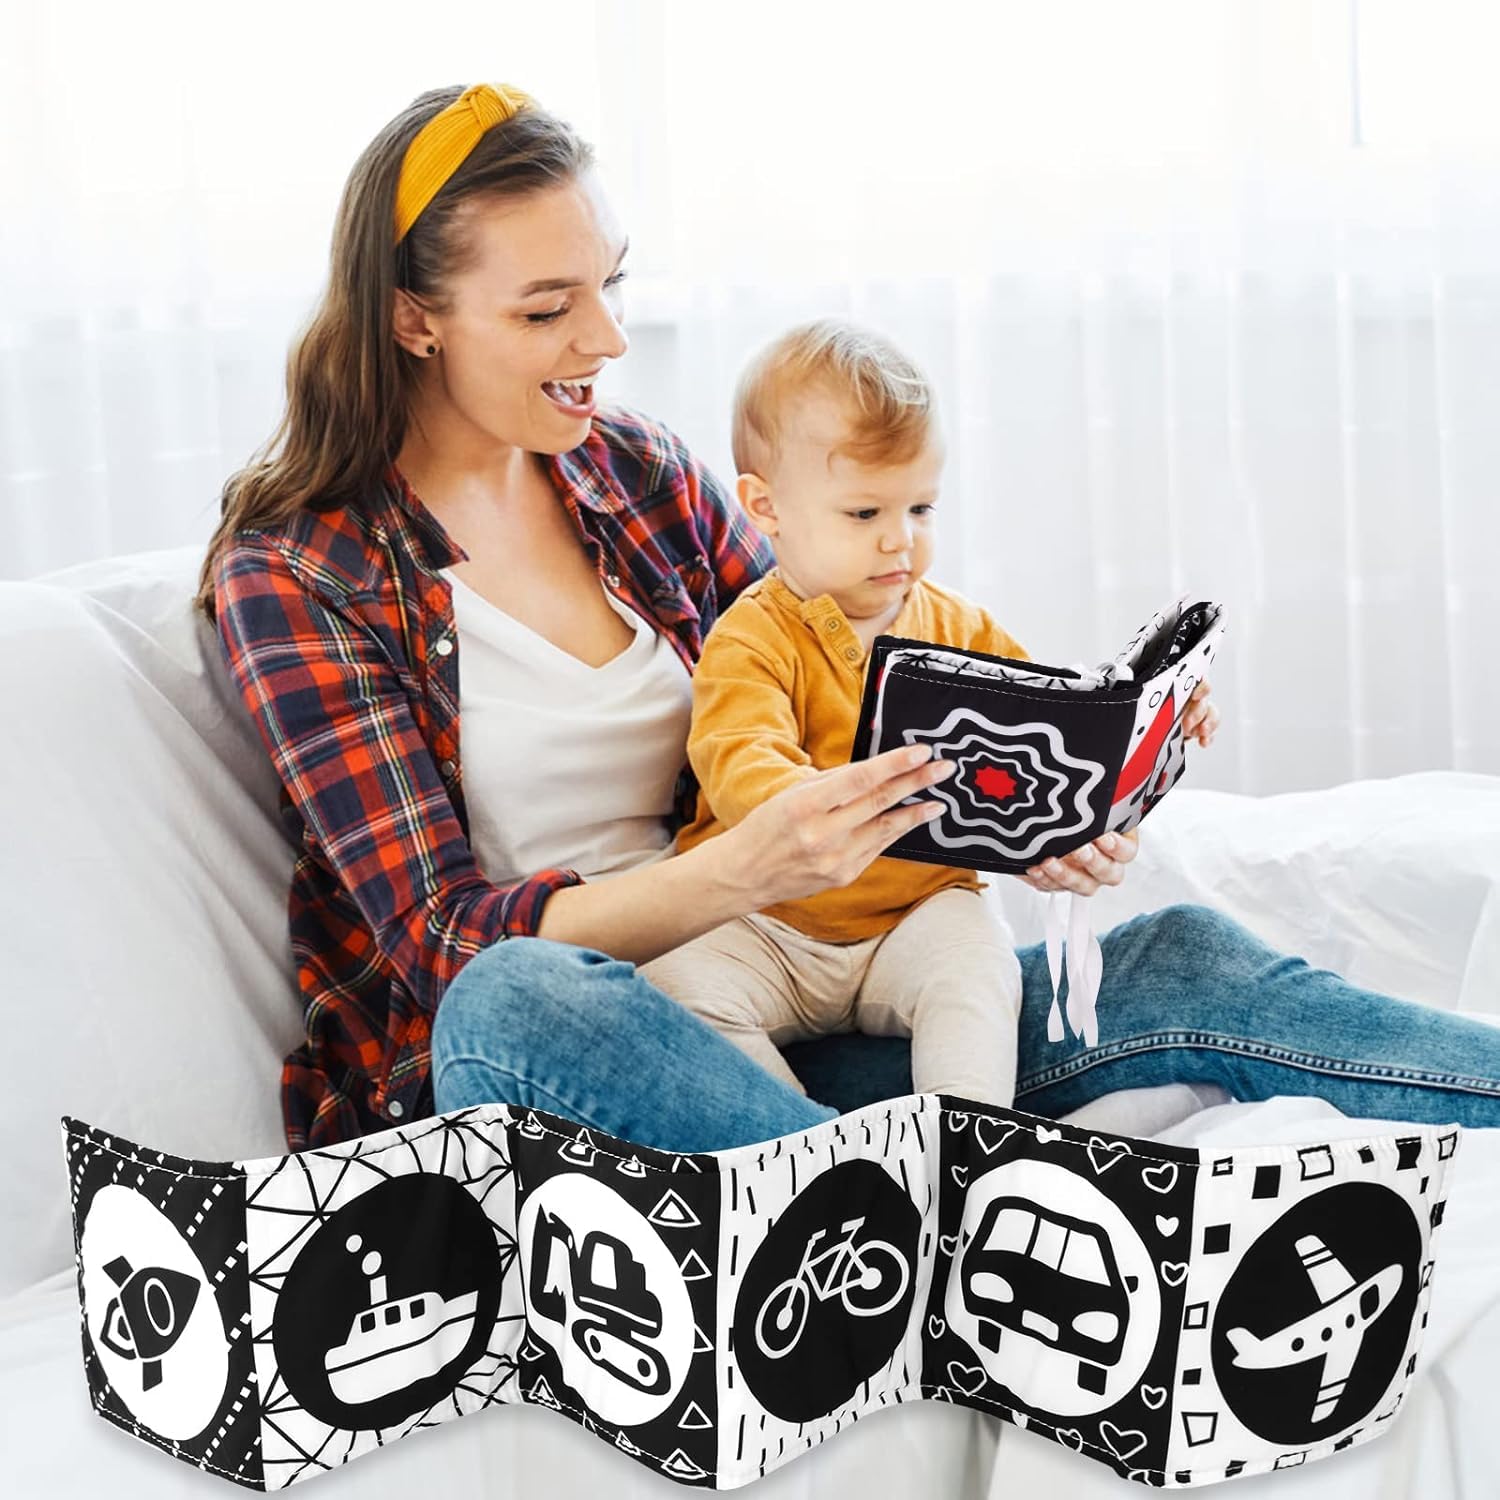 KolorFish Black and White Cloth Books High Contrast Baby Toys, 0-6 6-12 Months Soft Baby Book,Infant Tummy Time Toys,Baby Activity Crinkle Folding Educational Activity Suitable for Boys Girls (Crab)